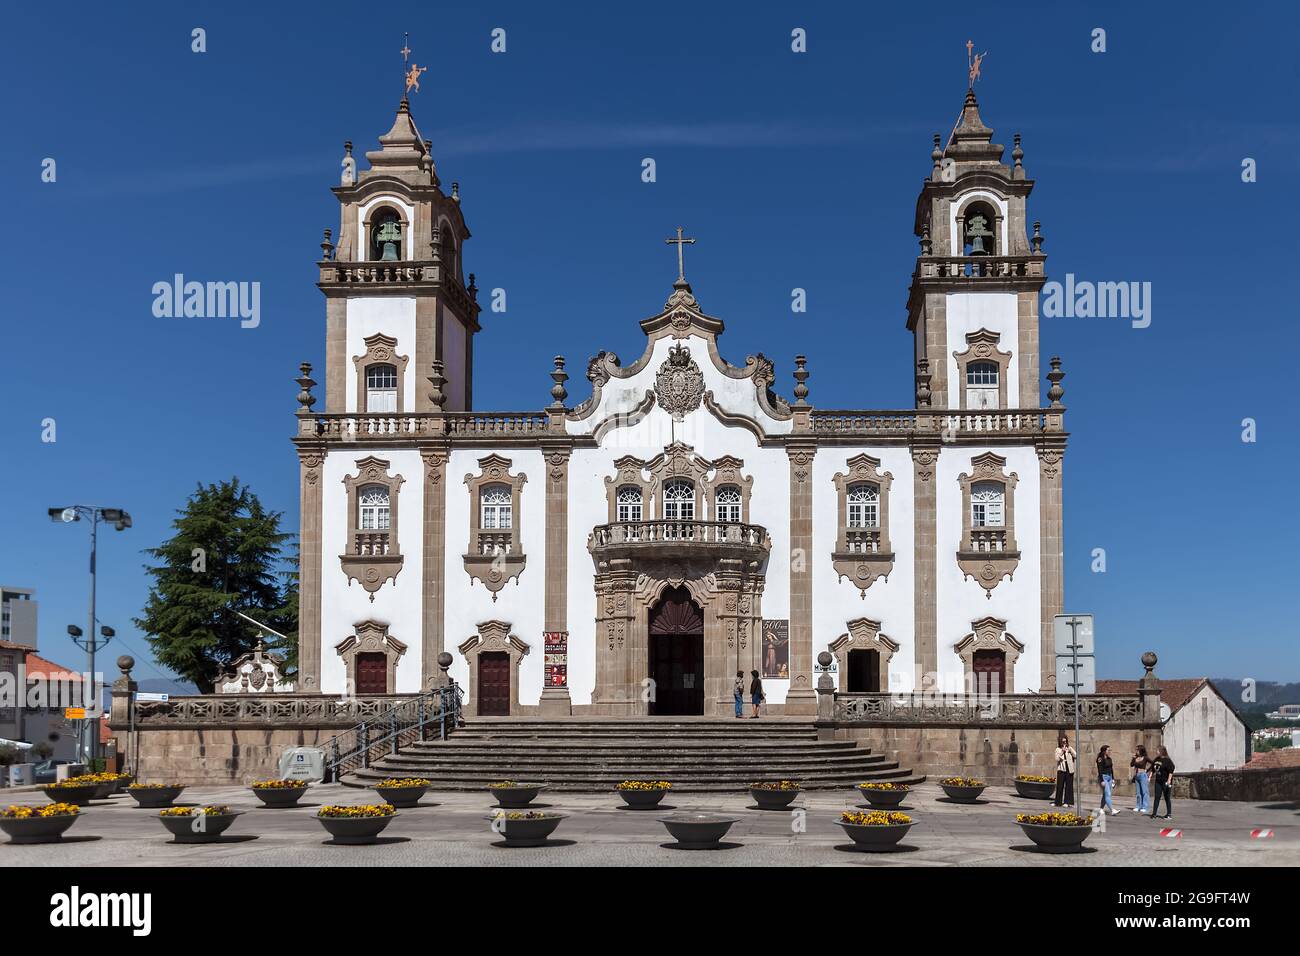 Viseu Portugal - 05 08 2021 : View at the front facade of Church of Mercy, Igreja da Misericordia baroque style monument, architectural icon of the ci Stock Photo